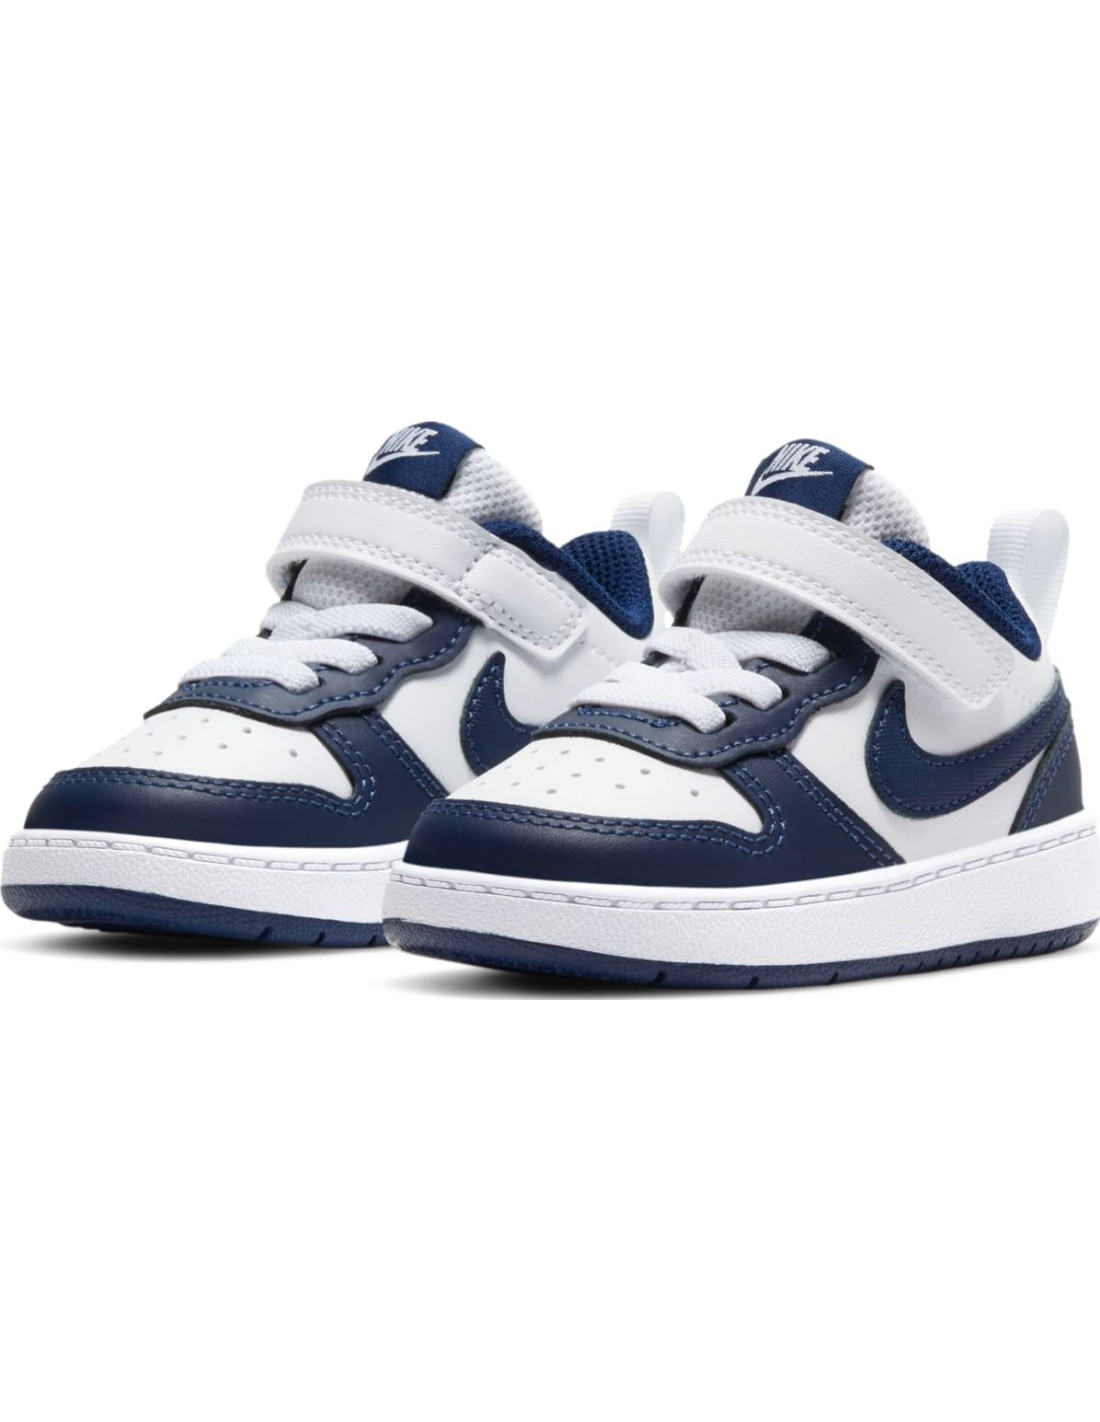 NIKE COURT BOROUGH LOW 2 BABY TODDL